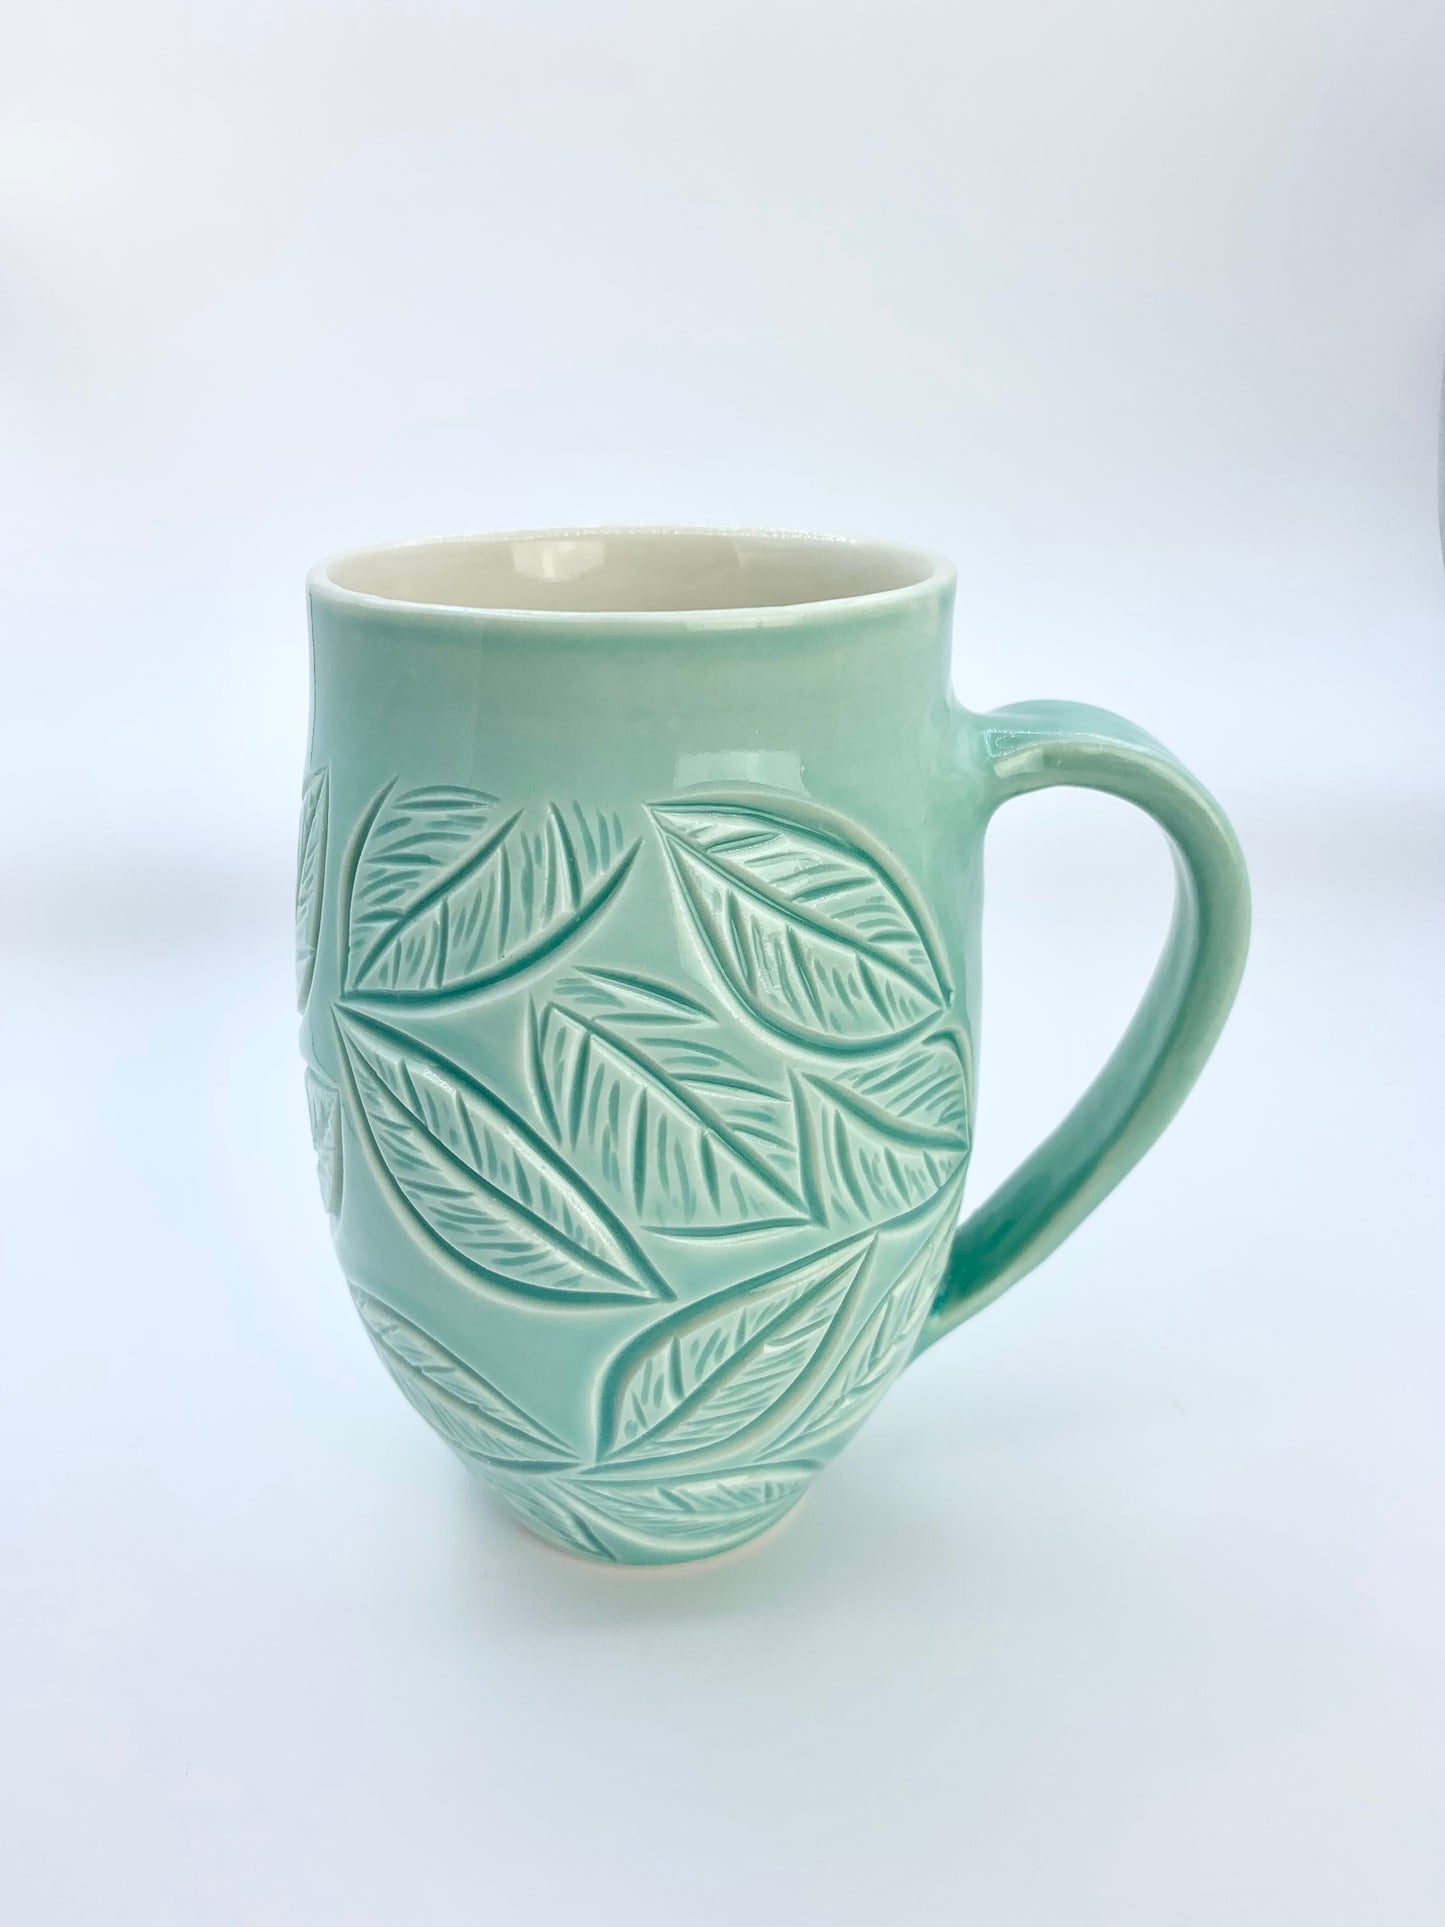 Large porcelain mug with leaf carvings in turquoise